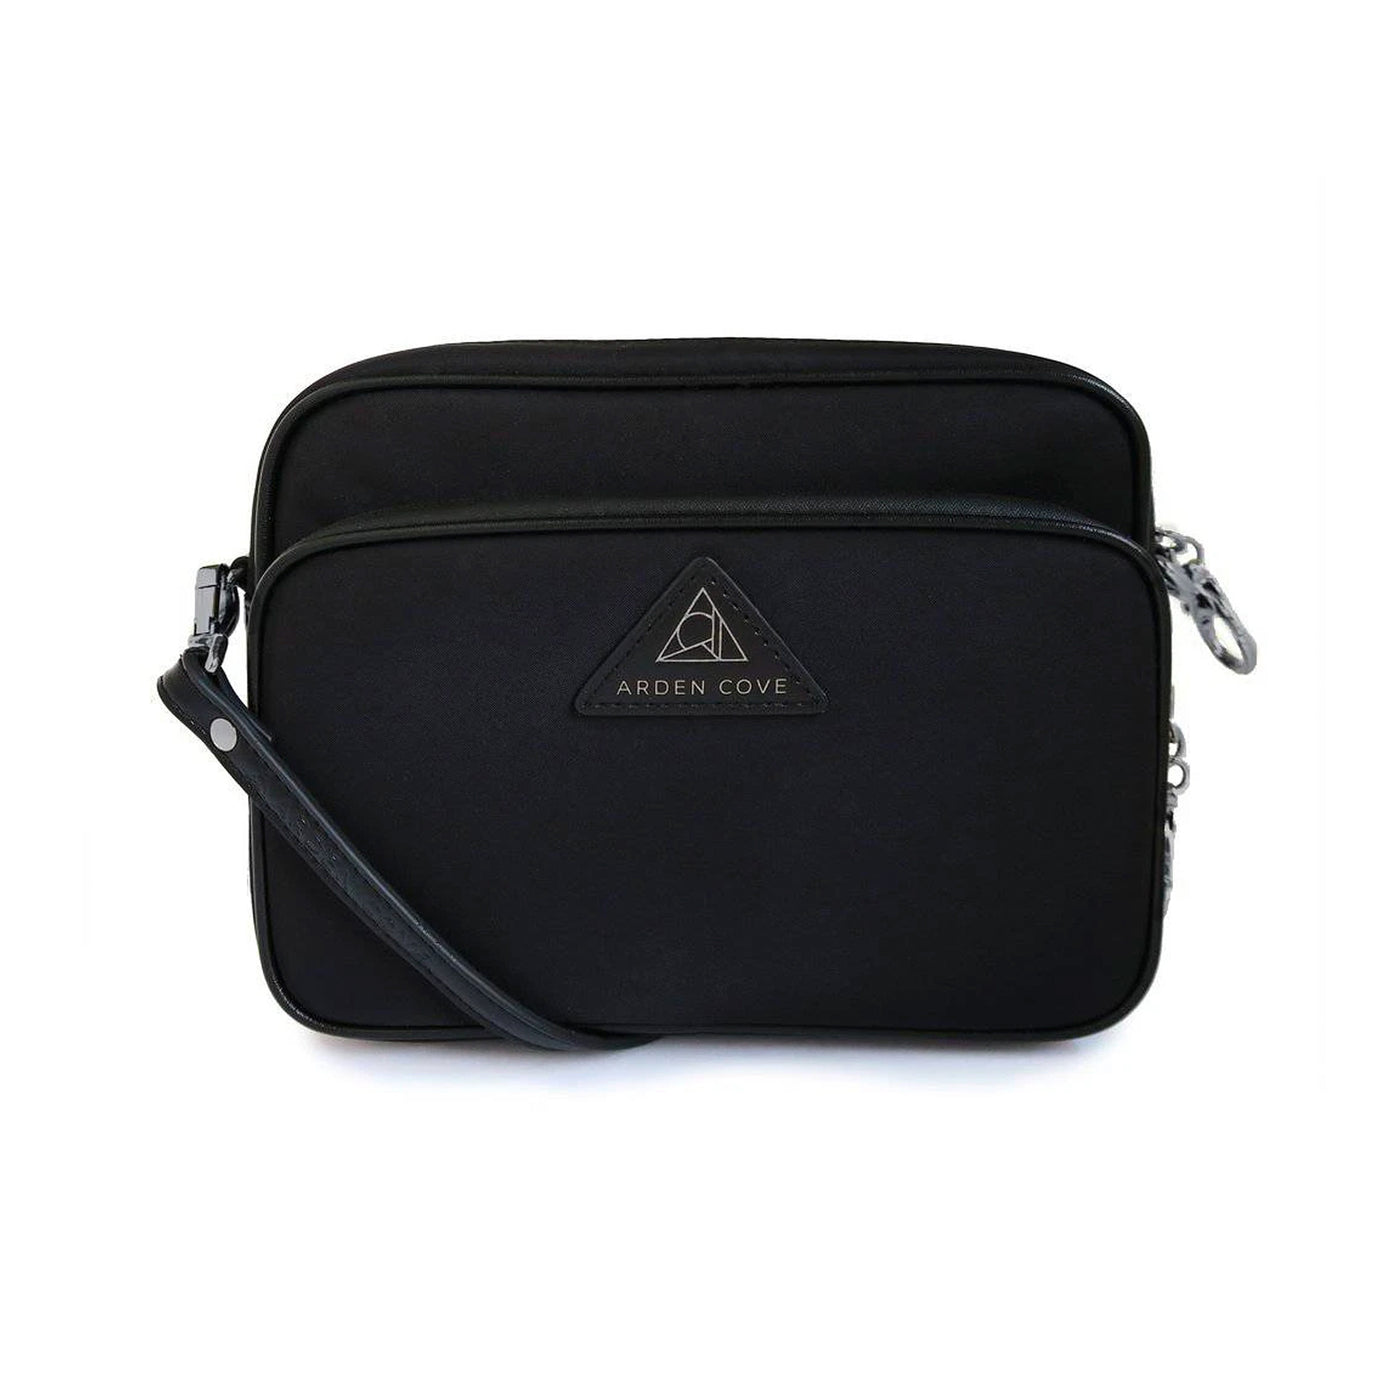 Anti-theft Water-resistant Travel Crossbody - Crissy Full Crossbody in Black Gunmetal with slash-resistant faux leather & classic clasps straps - front view - Arden Cove